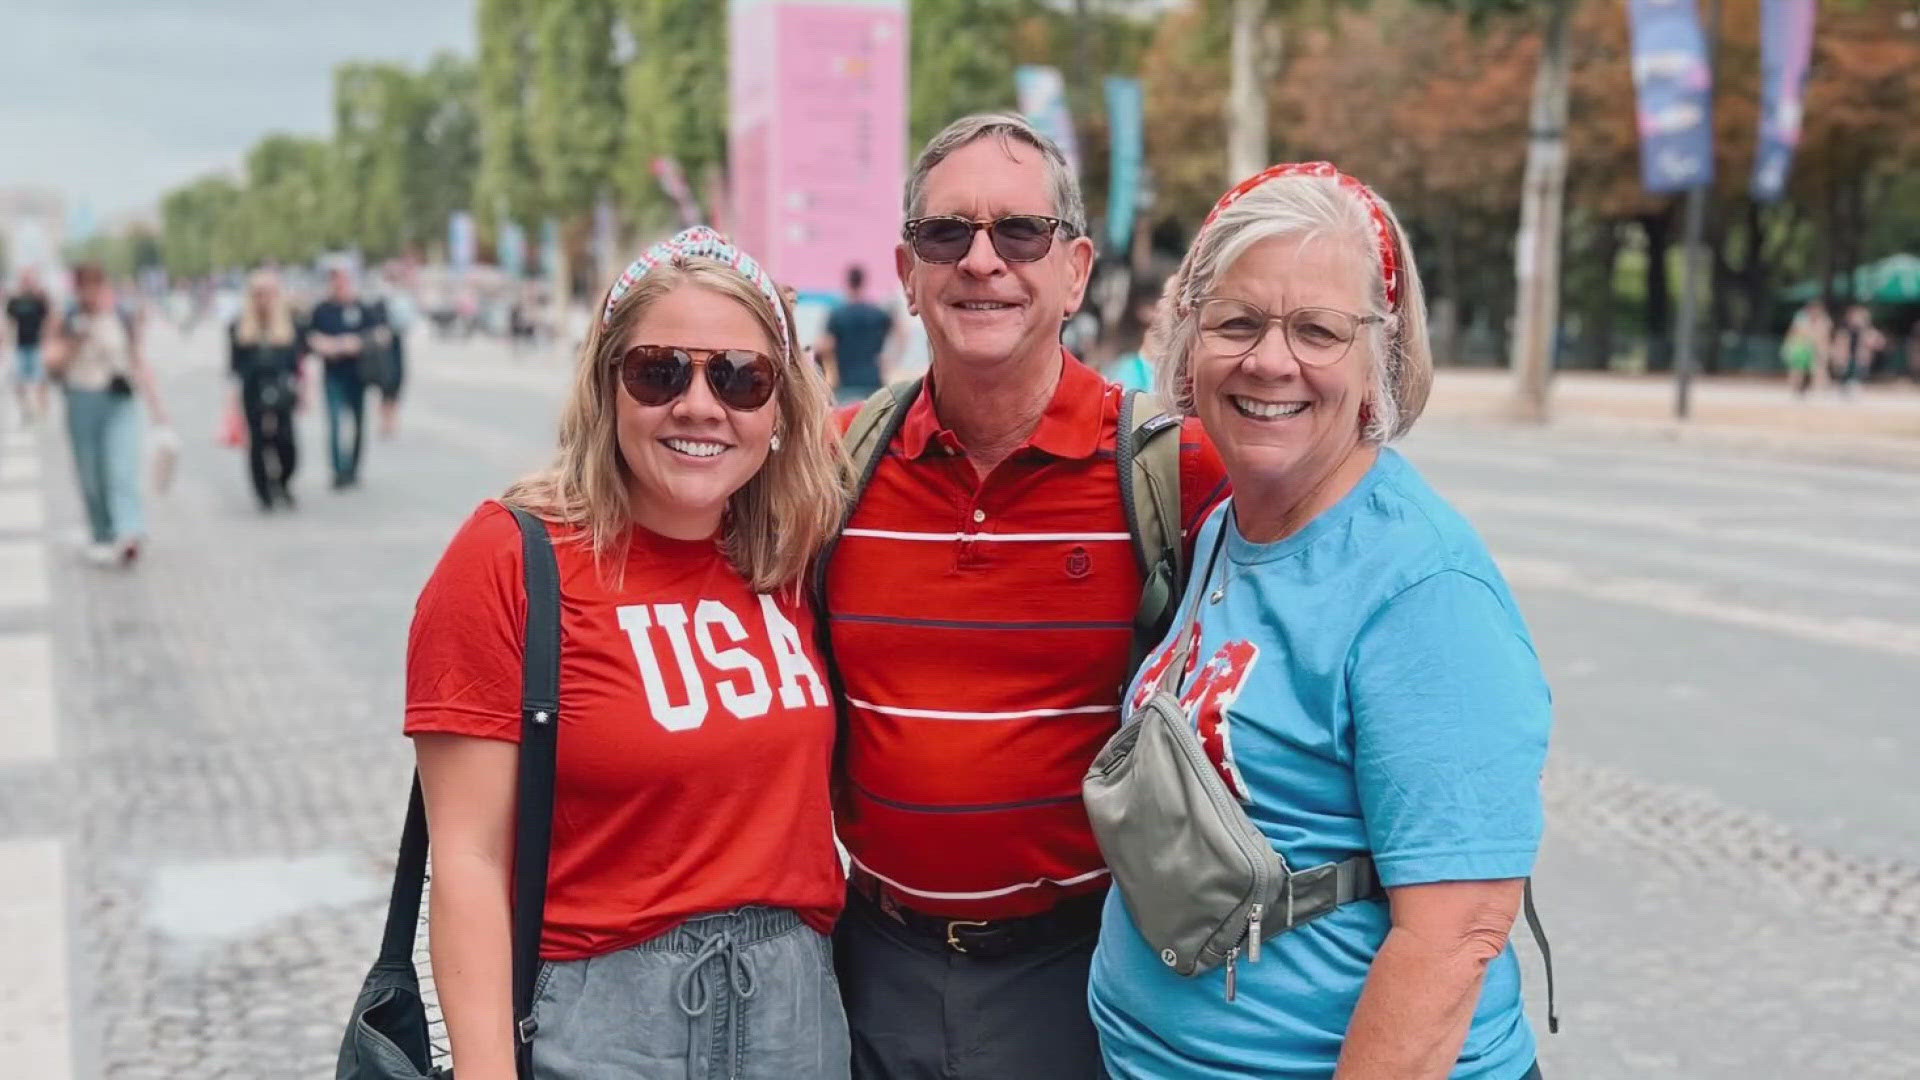 A family in Kirkwood, Missouri, made the trek across the Atlantic Ocean to bring multiple generations to the Olympics.